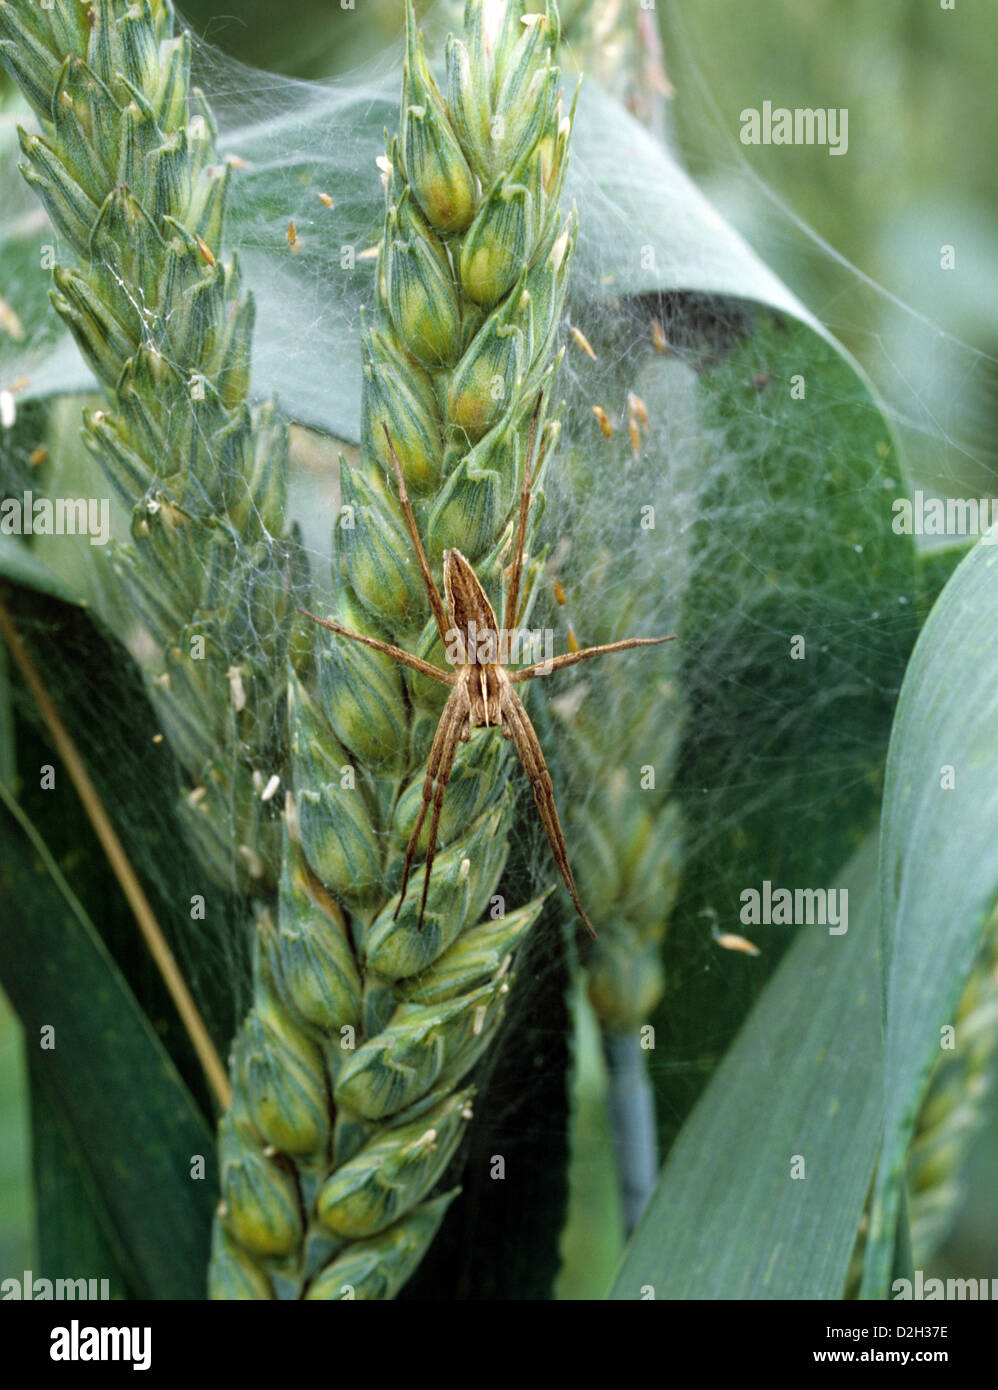 A hunting or wolf spider, Pisaura mirabilis, with a web constructed among ears of wheat Stock Photo